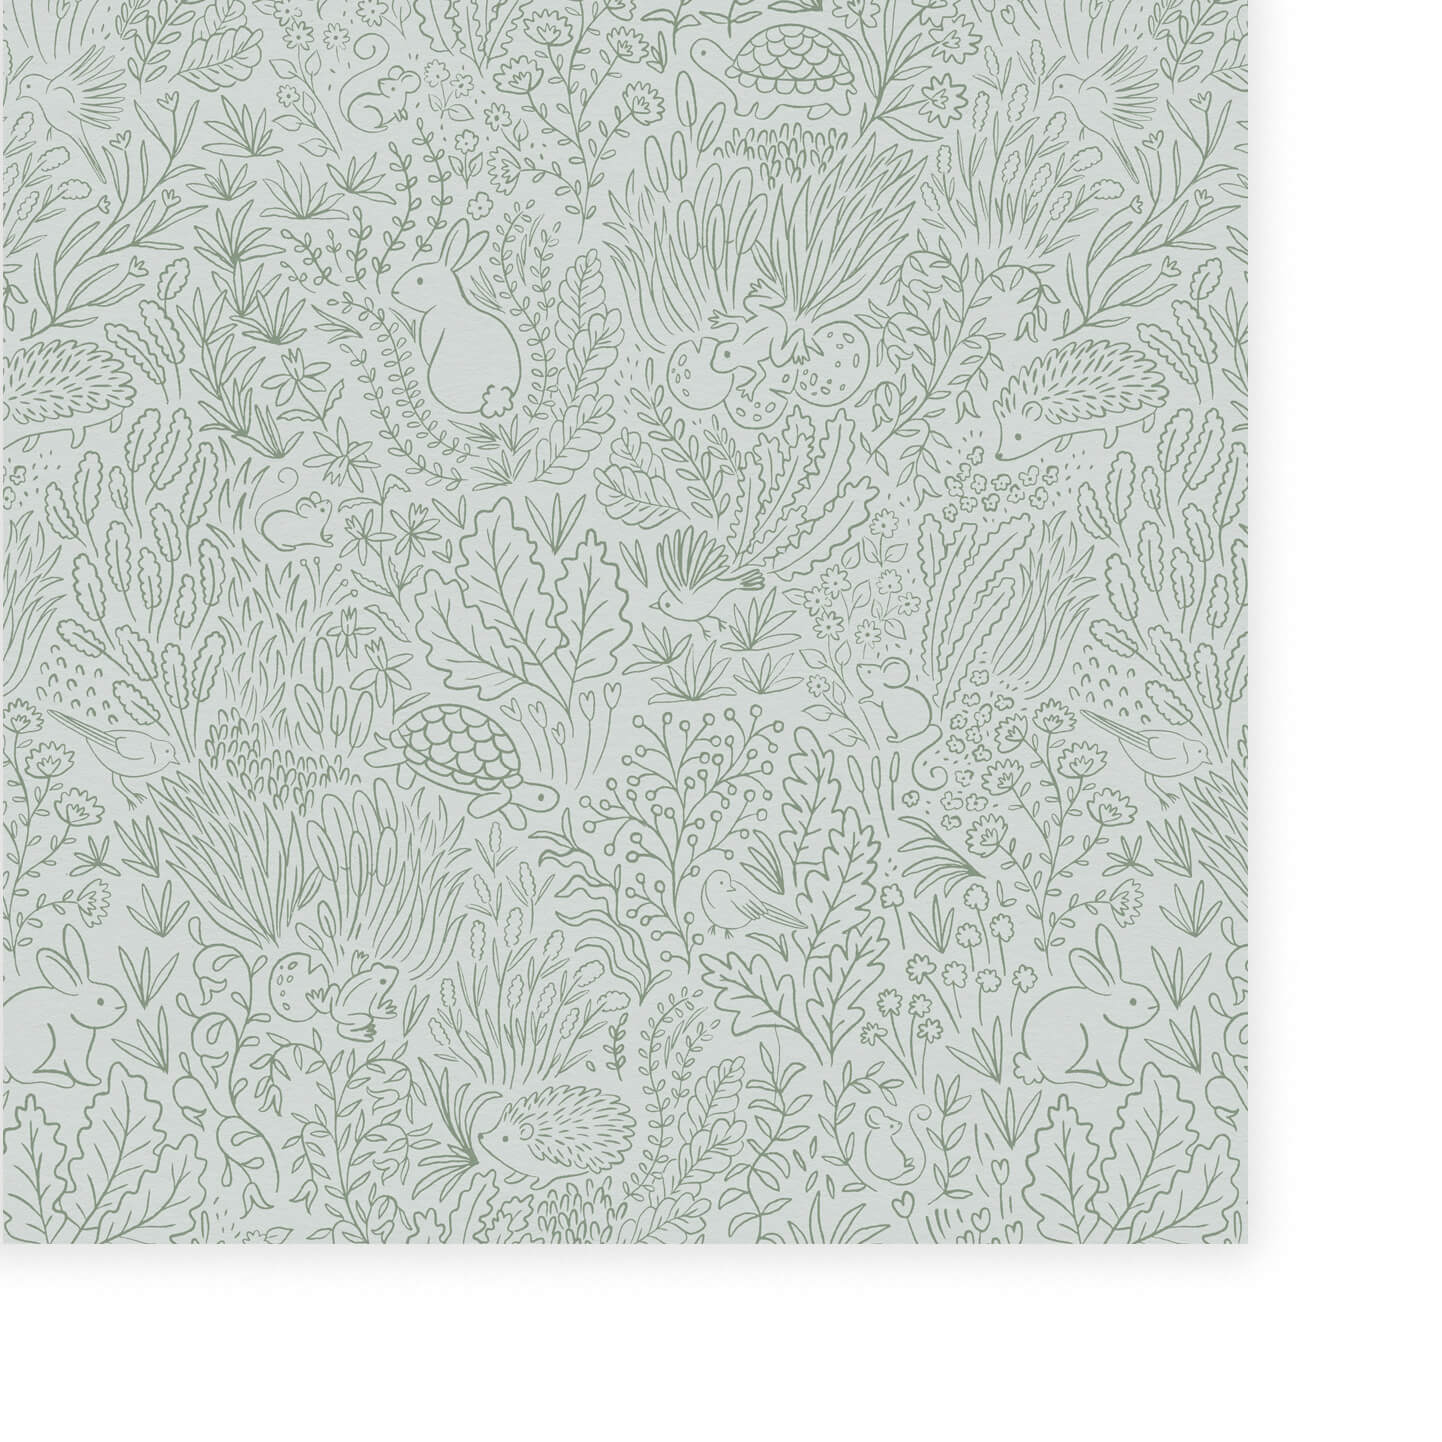 Wallpaper of sage green line work animals and florals such as rabbits, hedgehogs, frogs, tortoise, mice and birds.